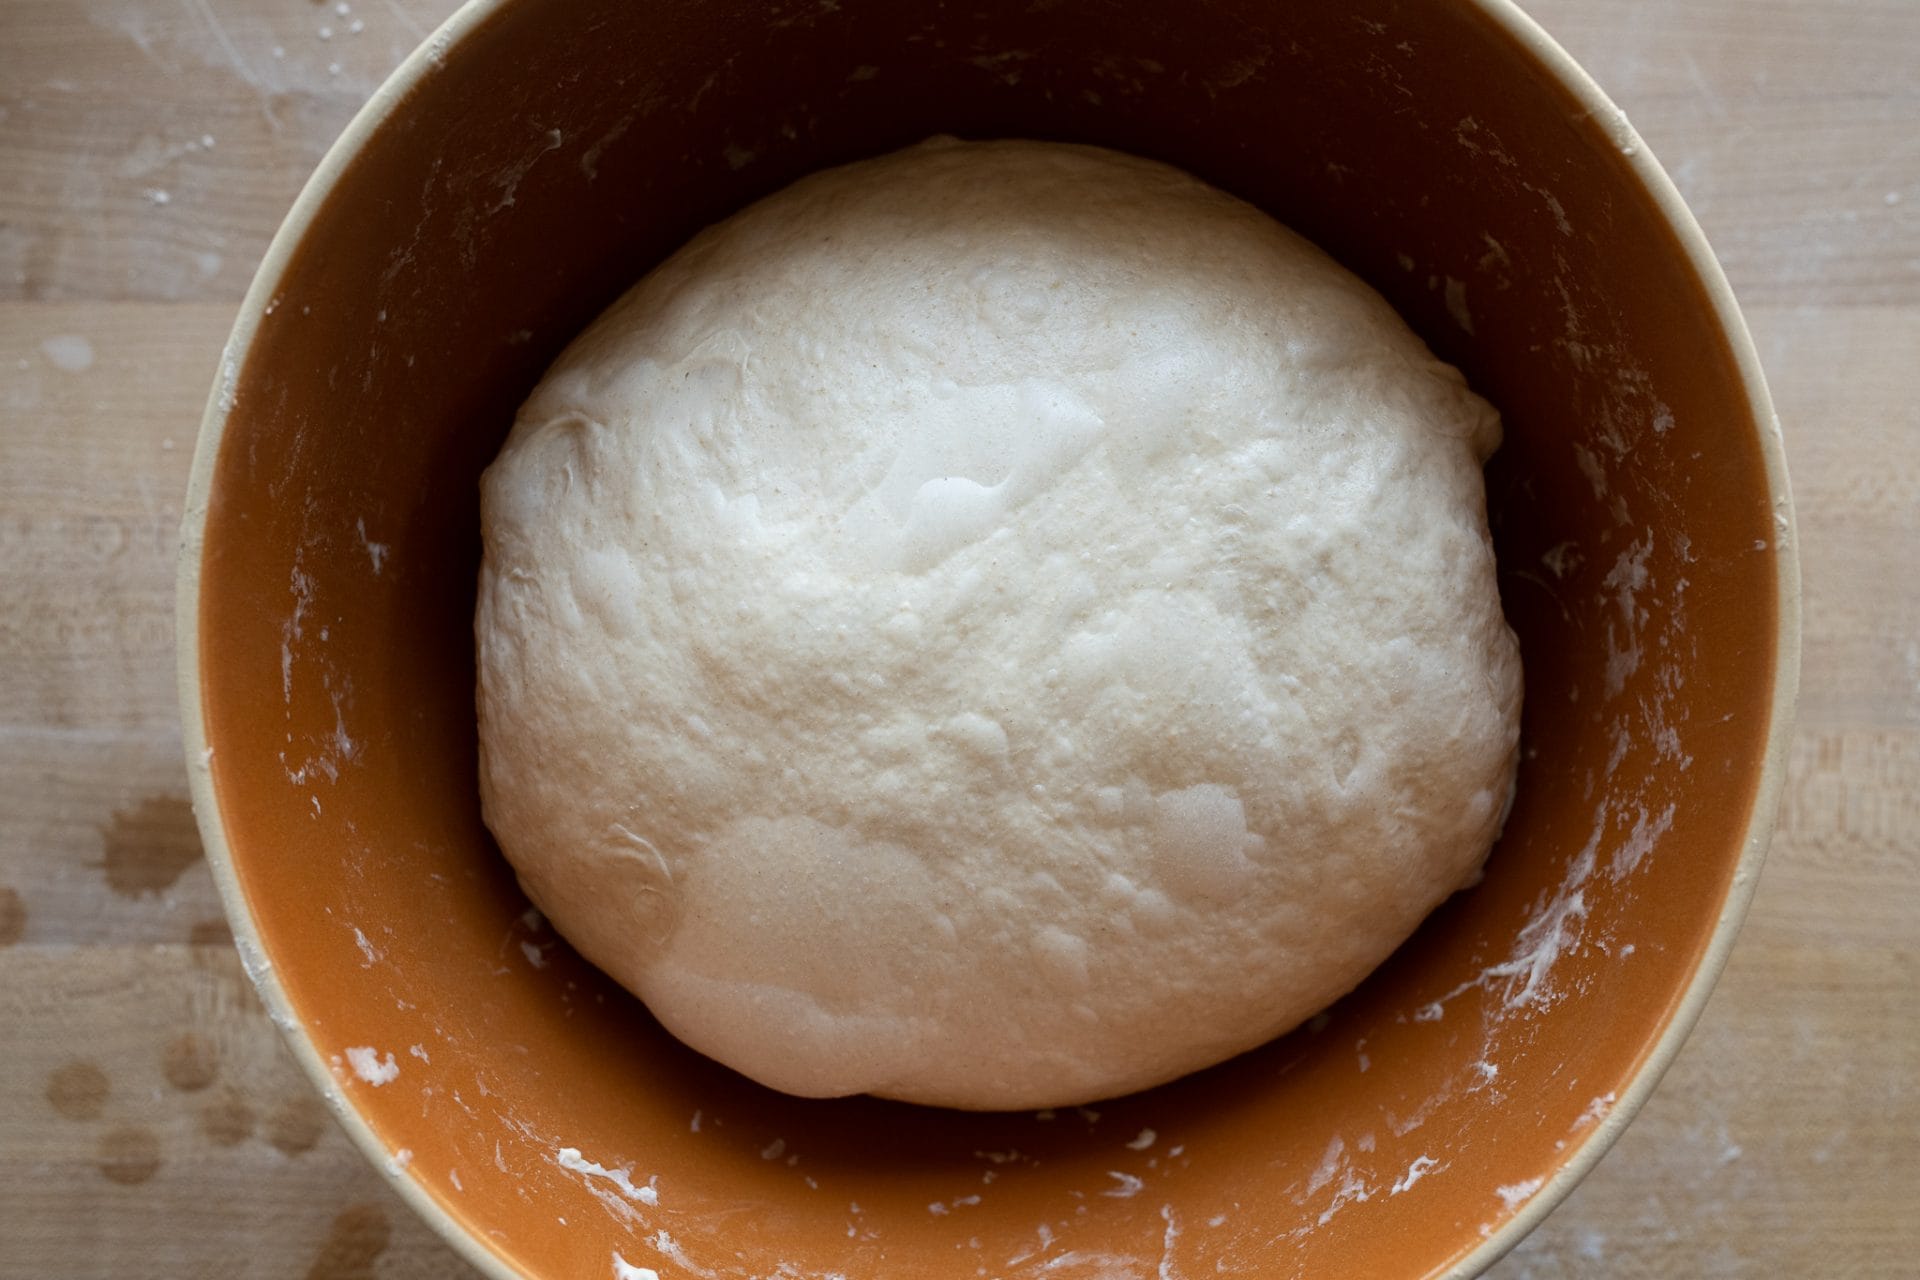 A strong dough that does not need any further stretch and folds